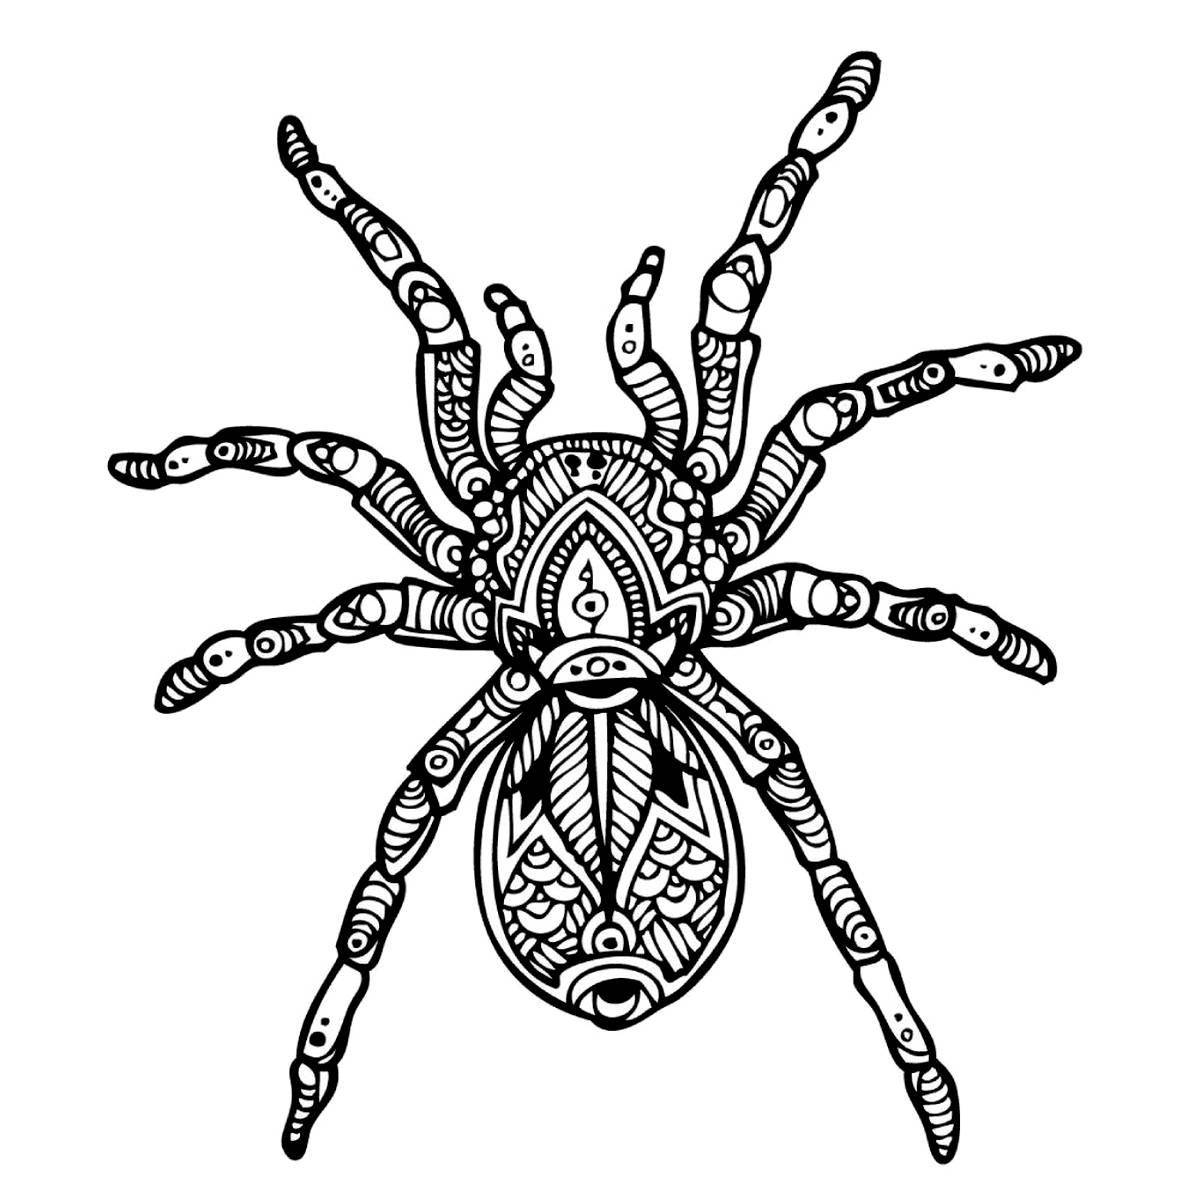 Great anti-stress spider coloring book